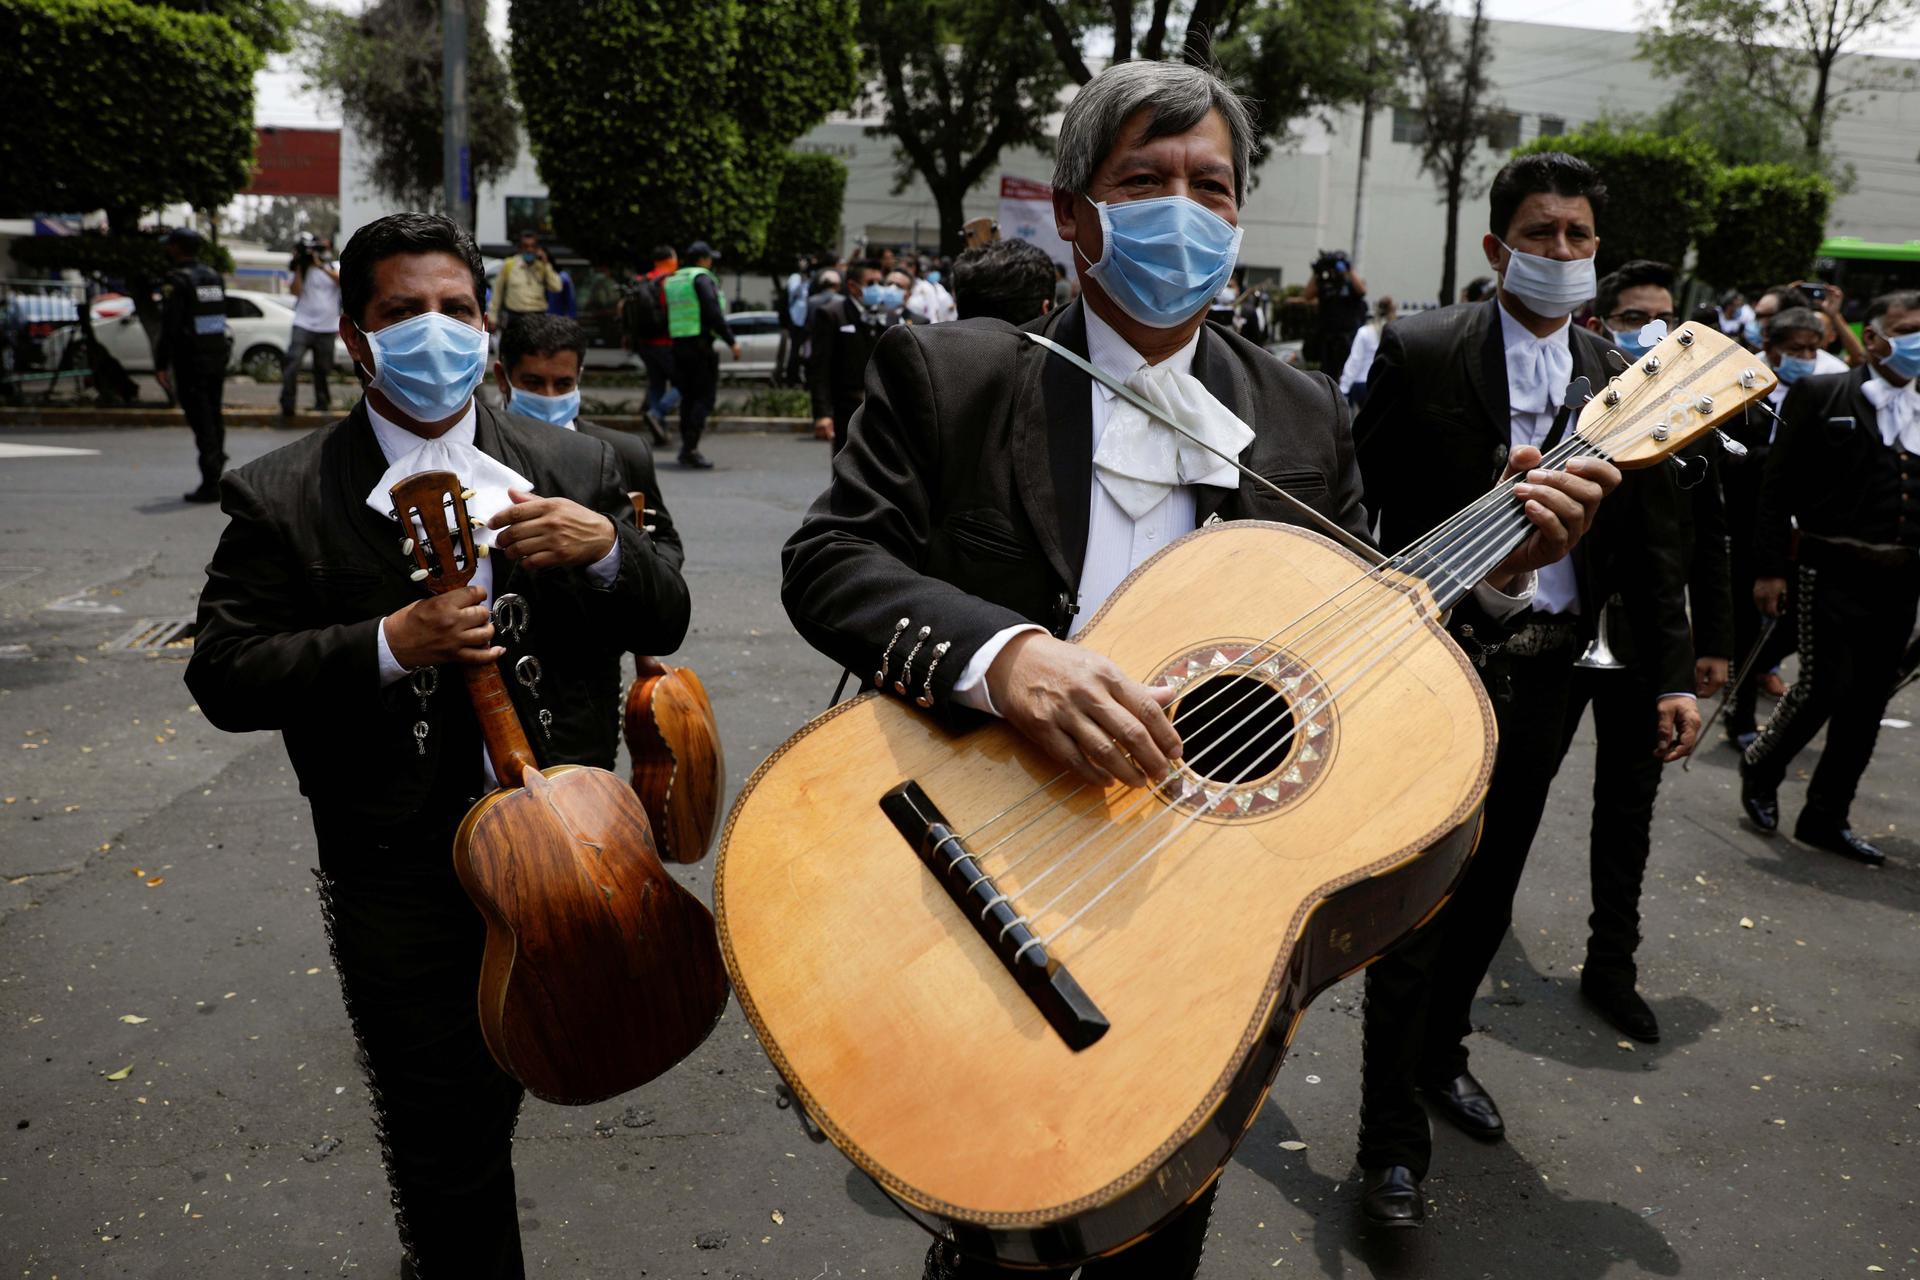 Members of a mariachi band wearing masks are seen after delivering a serenade for the medical staff of the National Institute of Respiratory Diseases during the coronavirus outbreak, in Mexico City, Mexico, April 7, 2020.